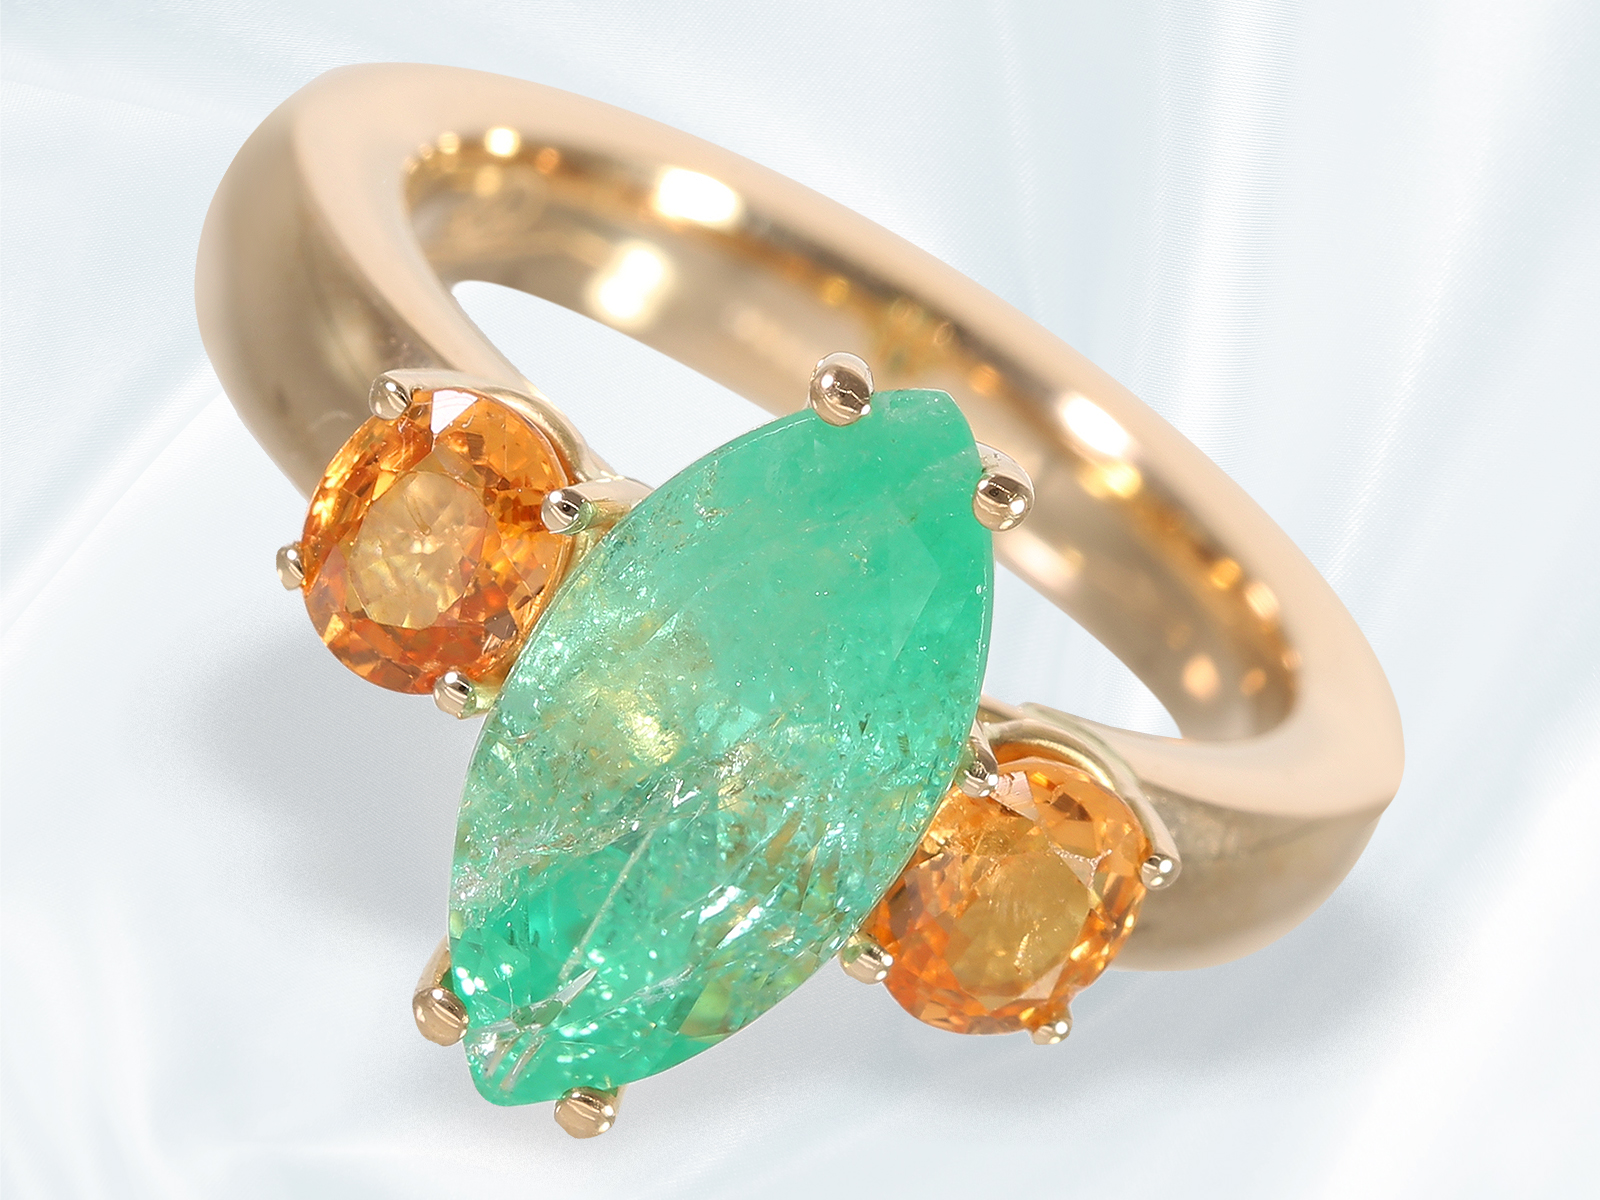 Handmade ring in like new condition with emerald of approx. 2ct, Schupp factory from Pforzheim, Germ - Image 3 of 6